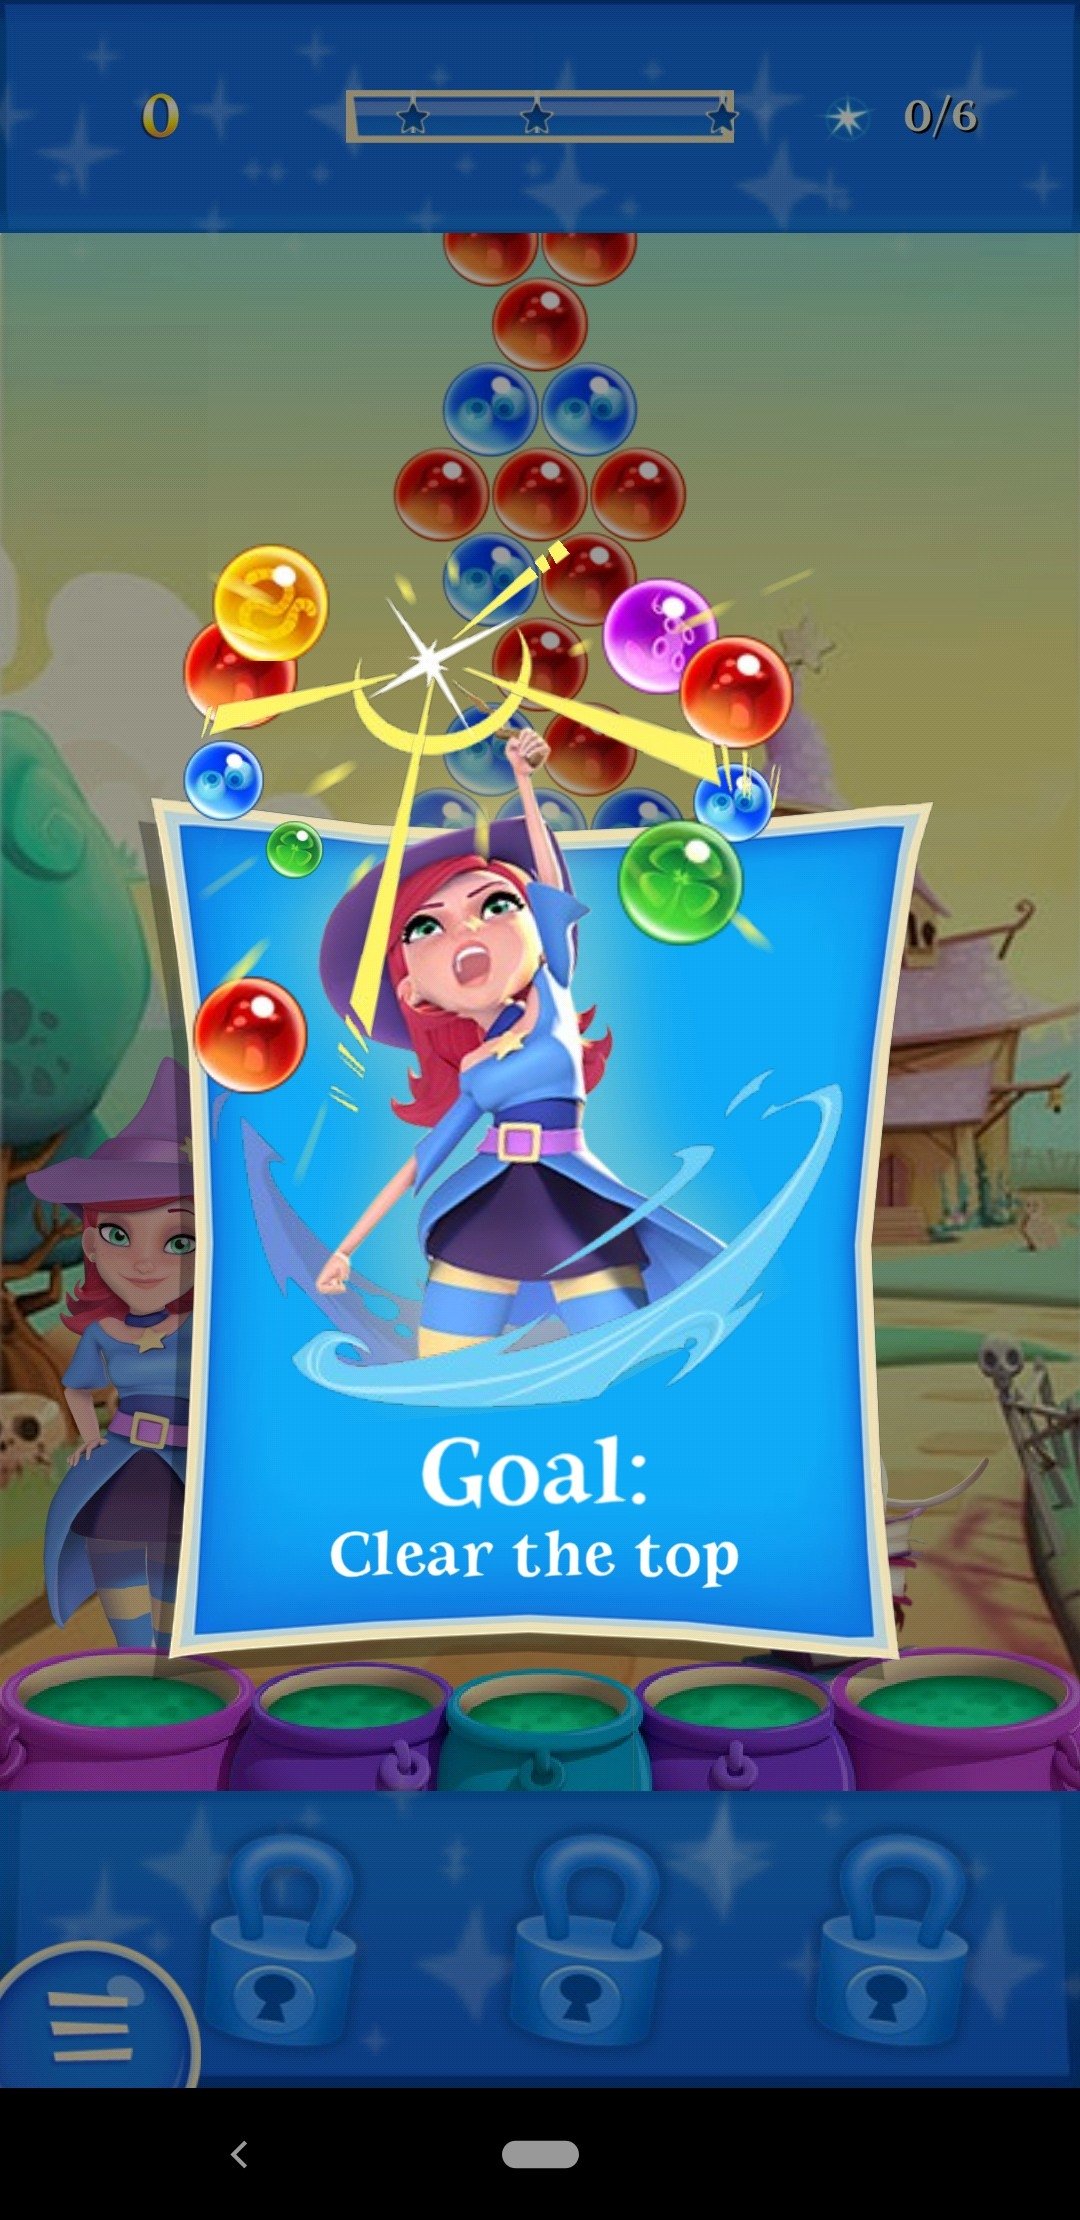 download the last version for ipod Bubble Witch 3 Saga